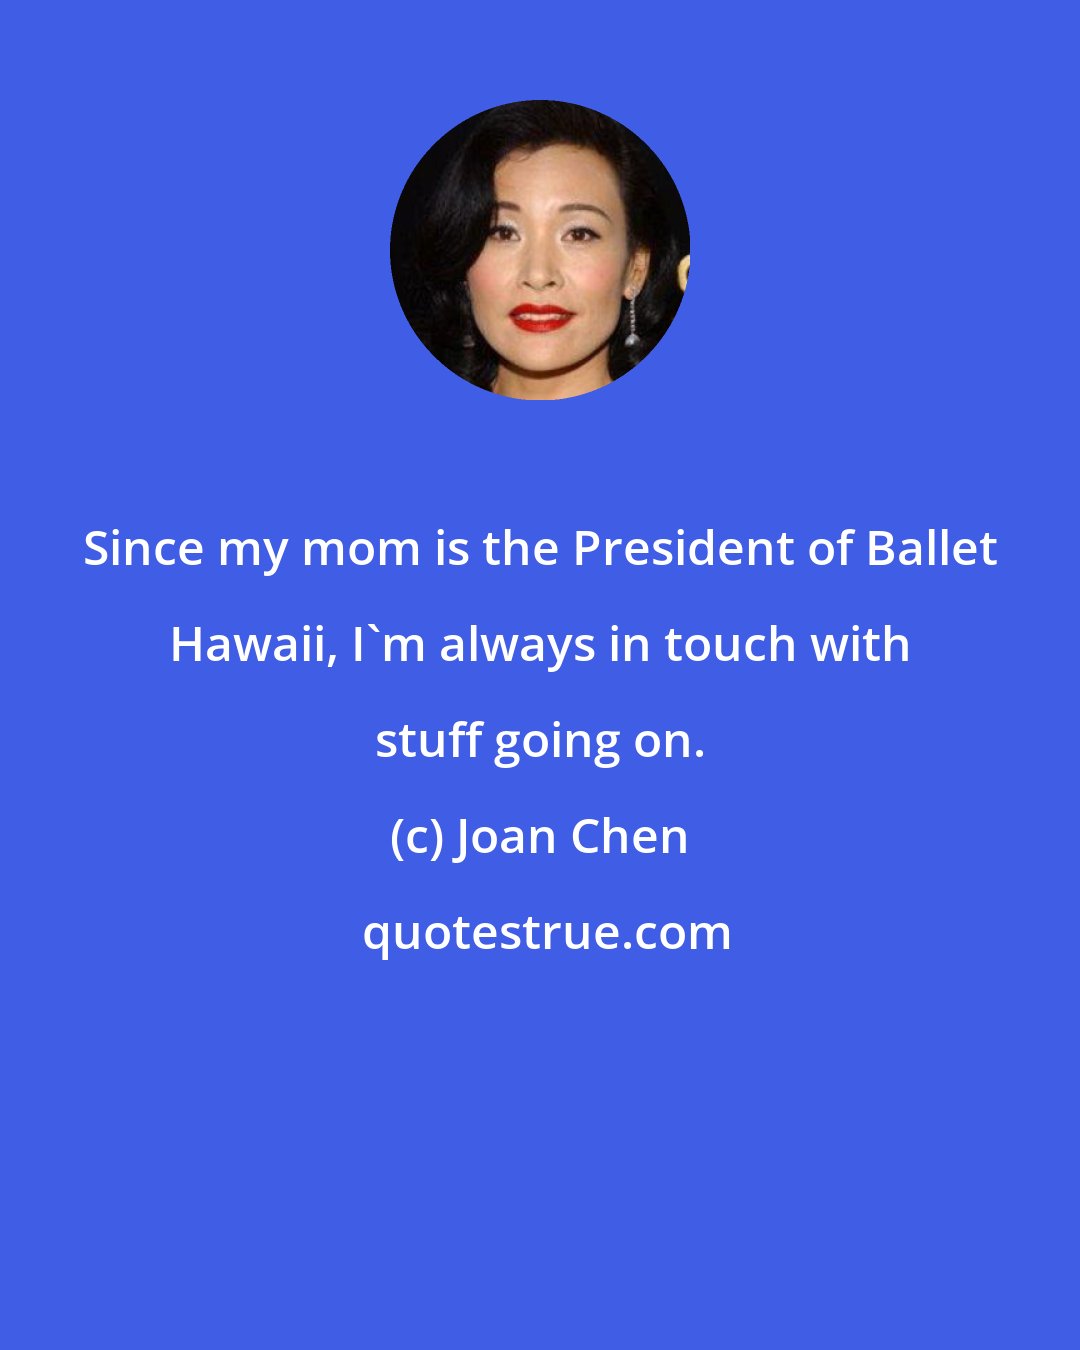 Joan Chen: Since my mom is the President of Ballet Hawaii, I'm always in touch with stuff going on.